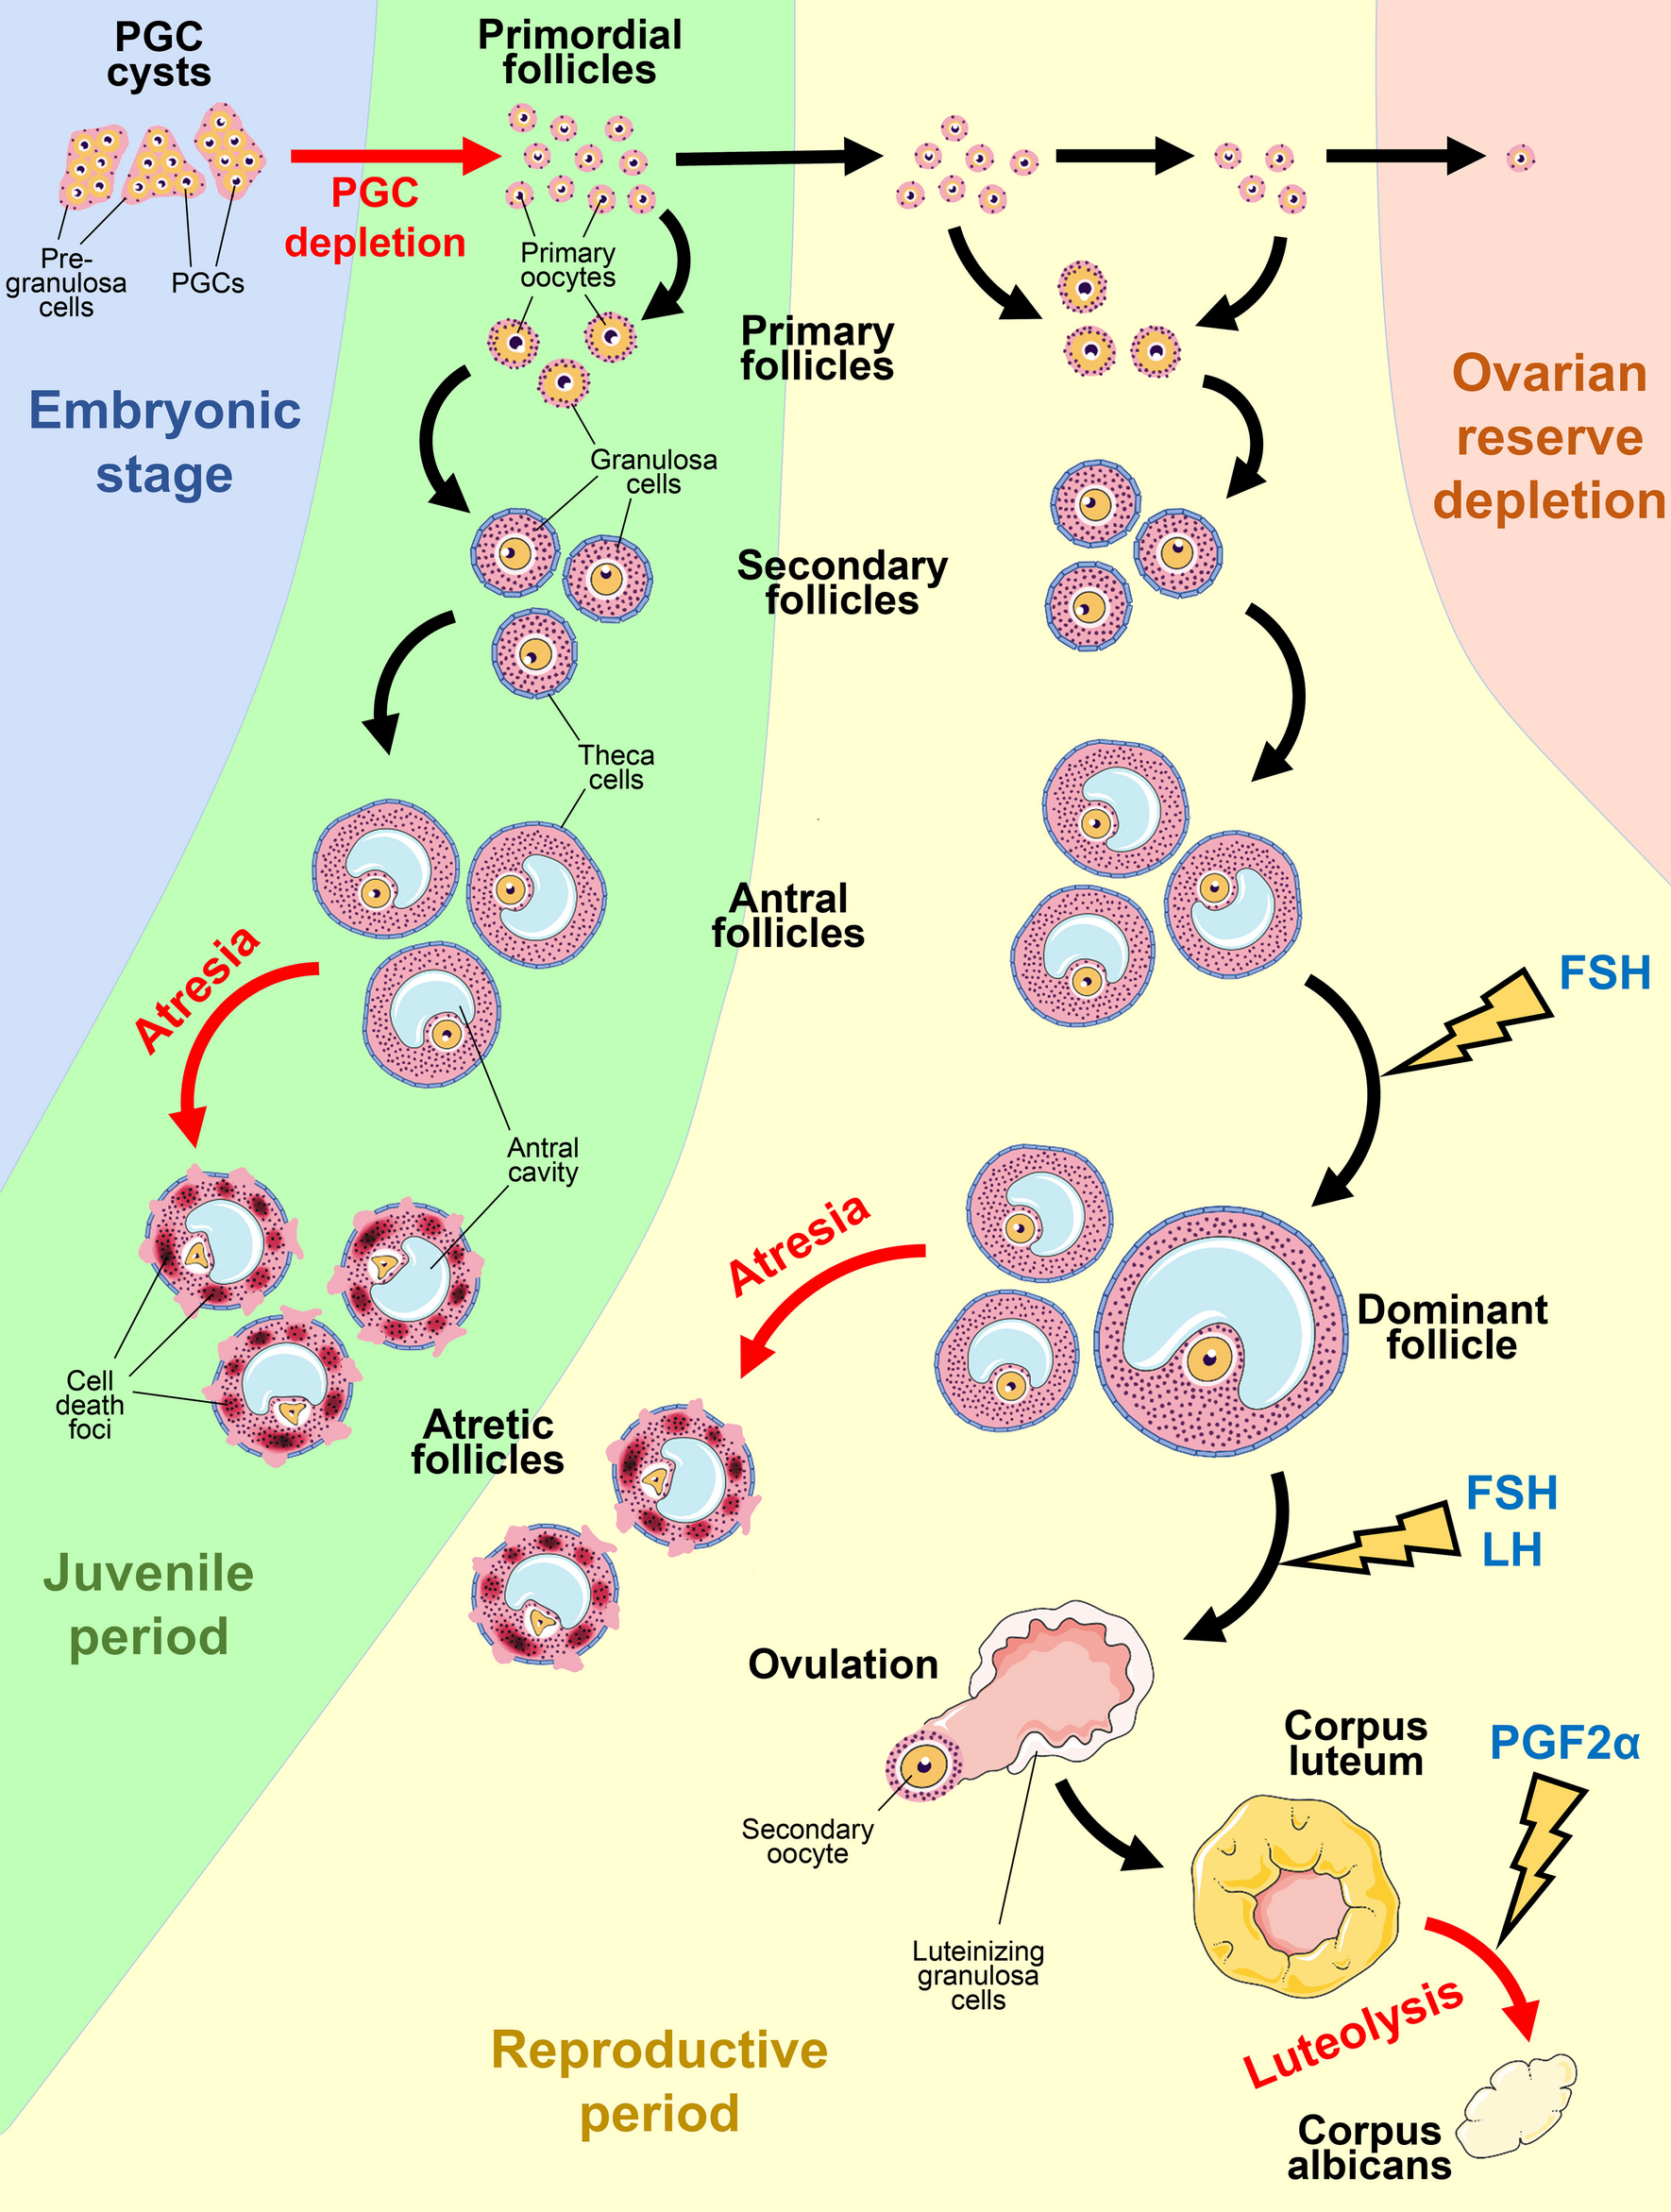 A matter of new life and cell death: programmed cell death in the mammalian ovary